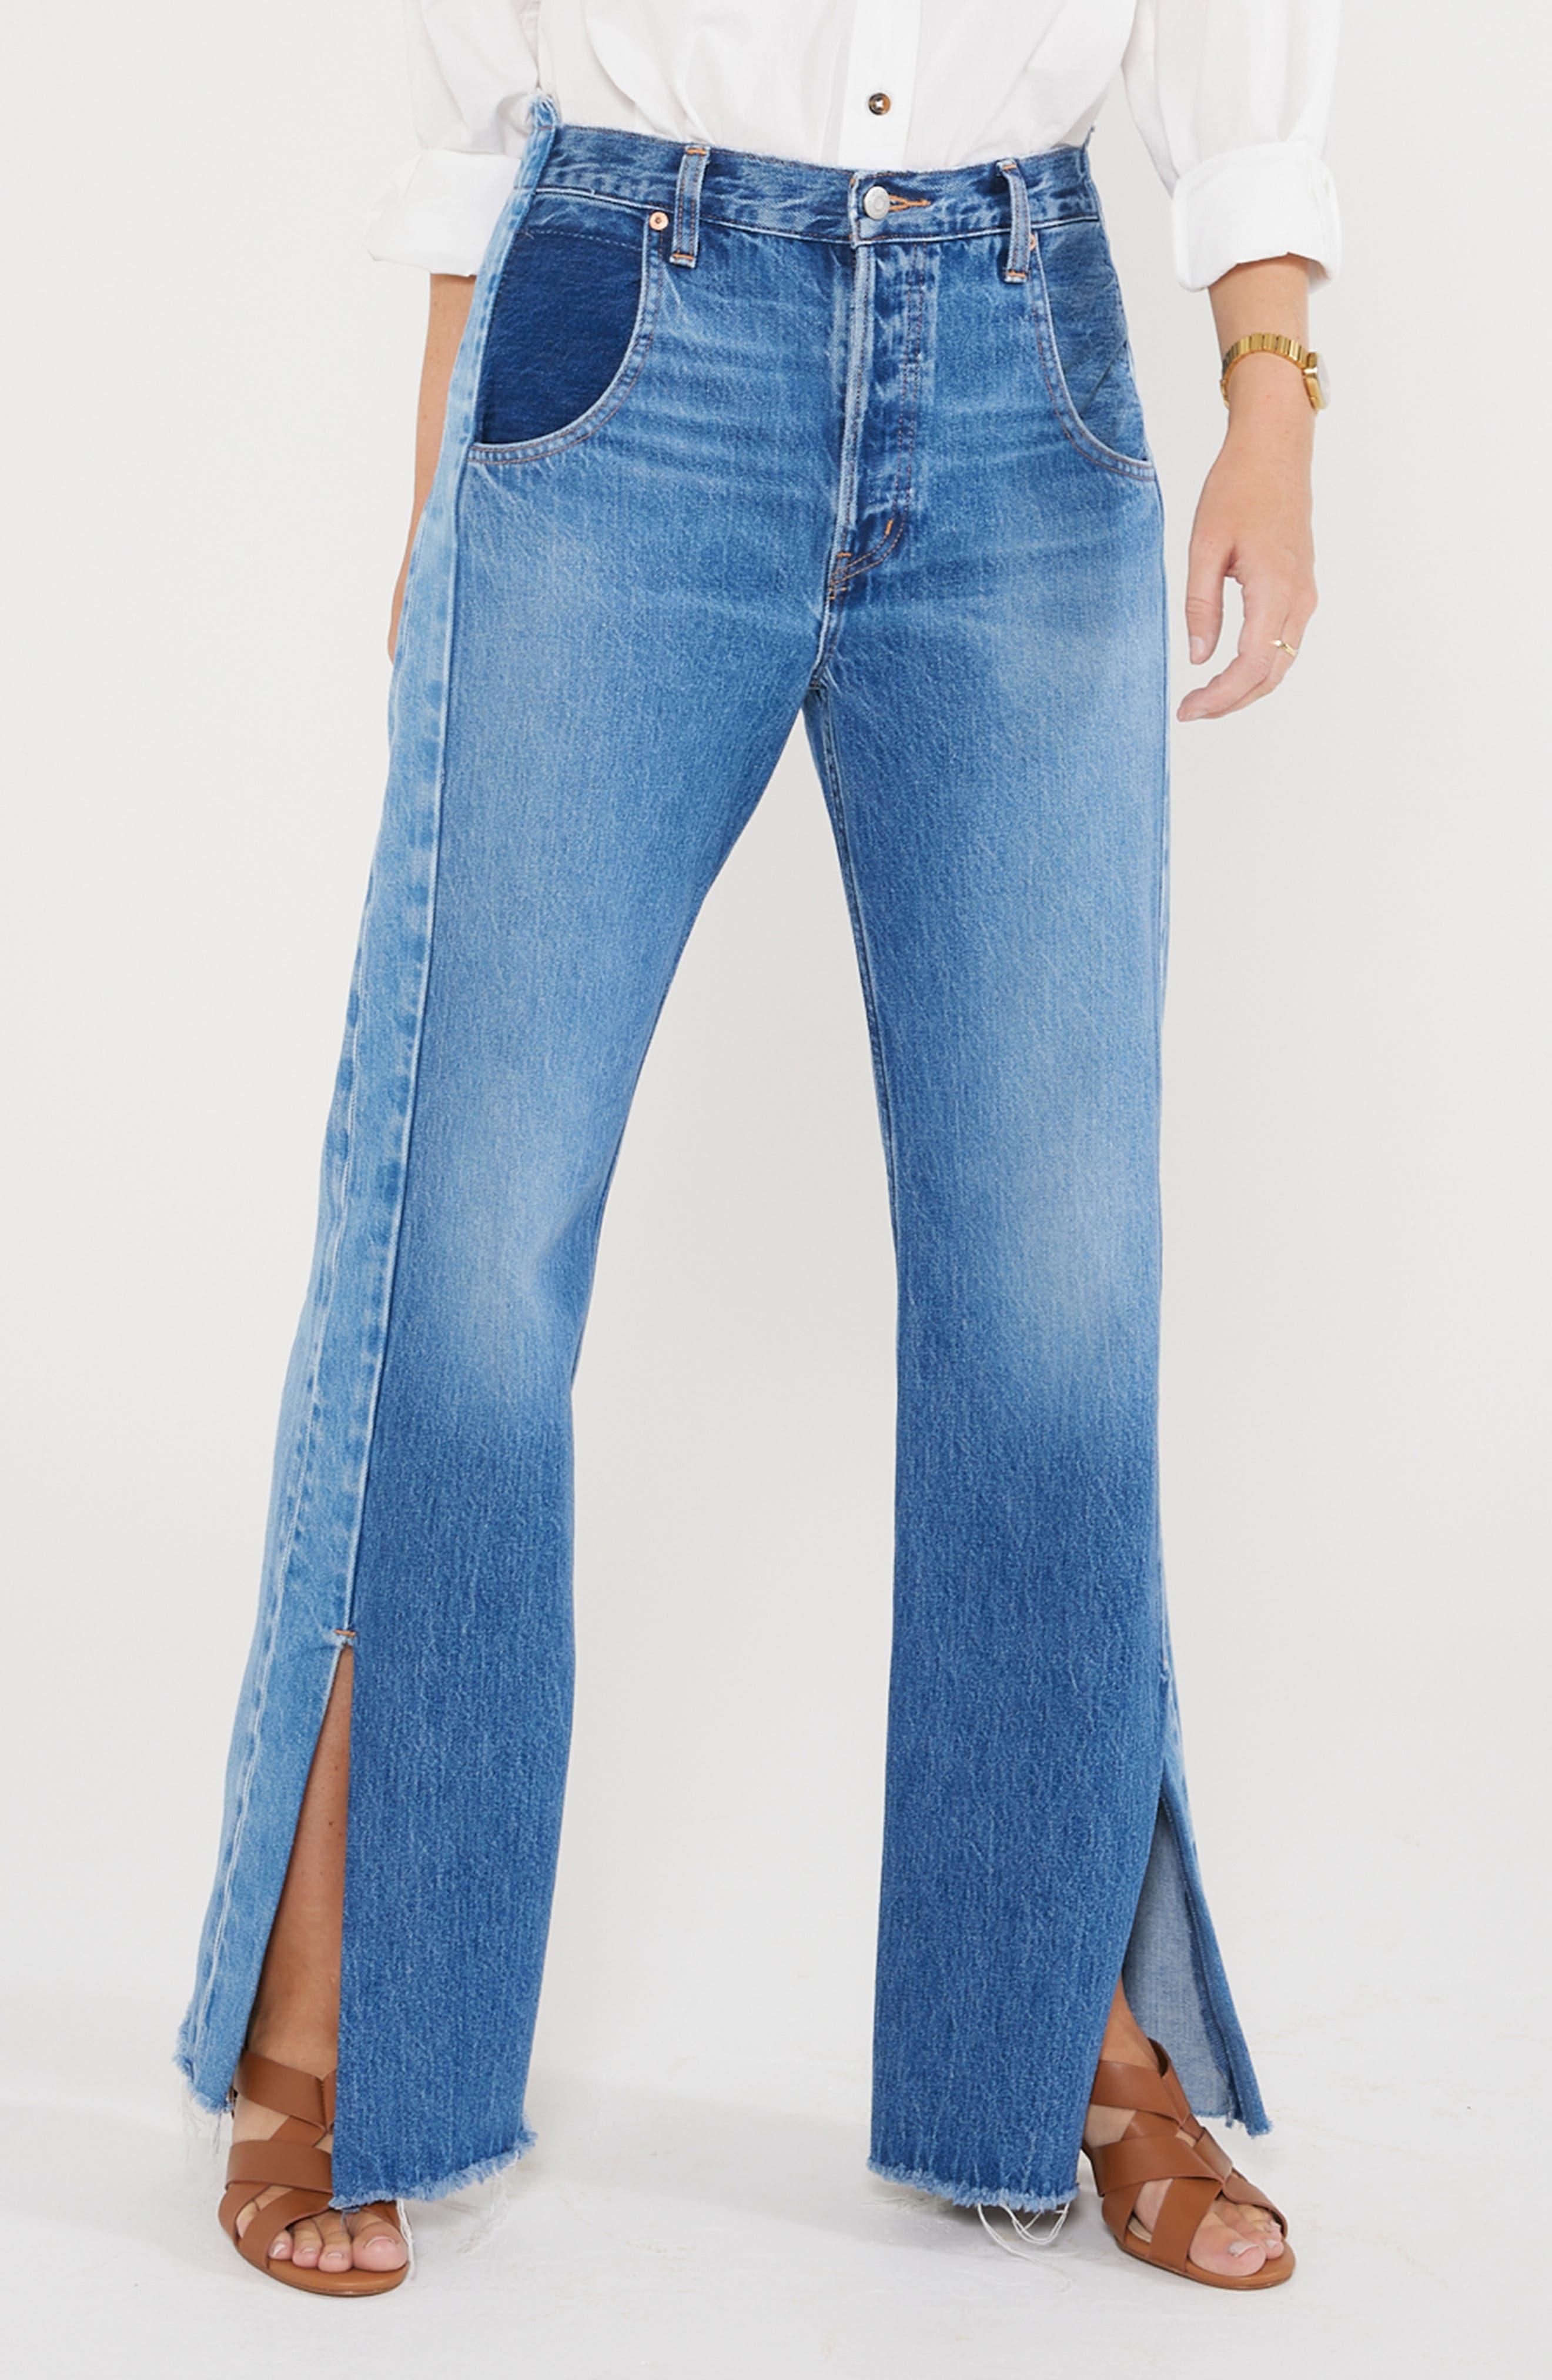 eTica Ética Amis Reworked Slit Hem High Waist Relaxed Bootcut Jeans in Blue  | Lyst